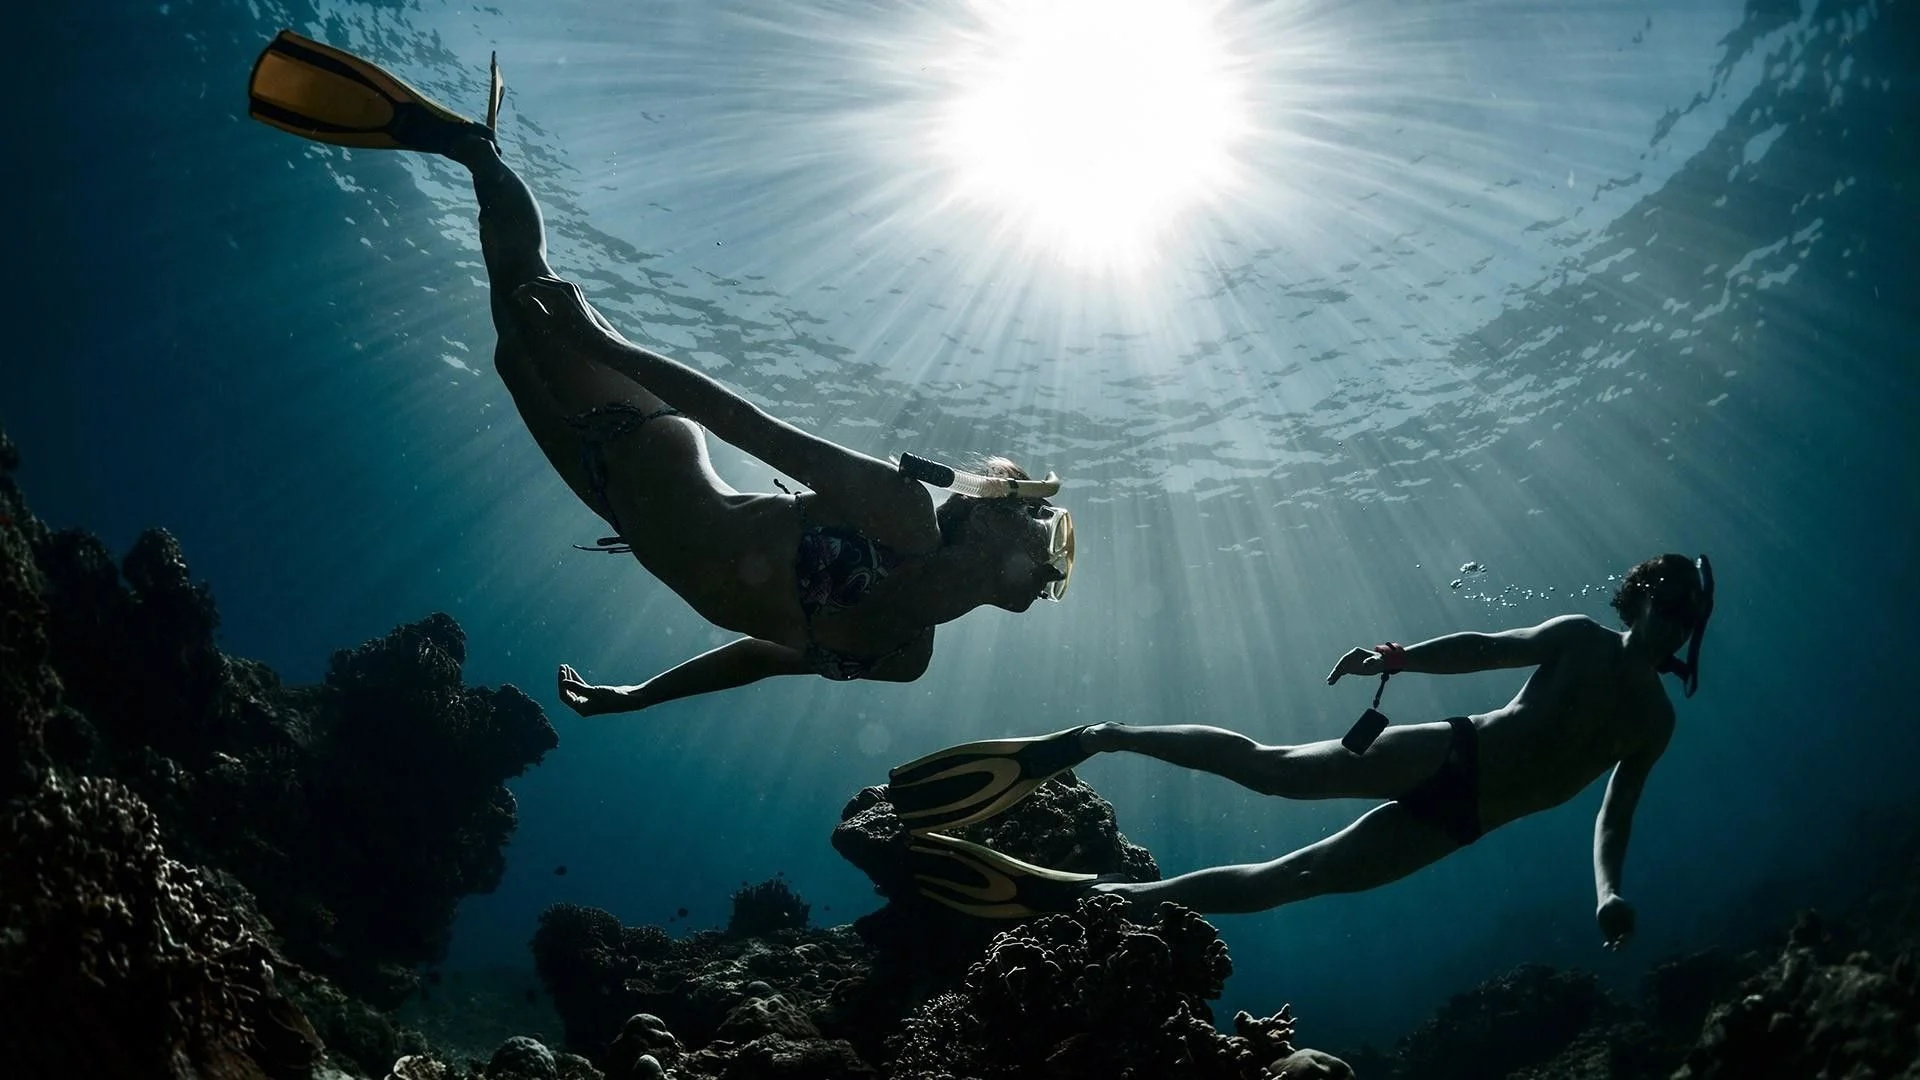 Freediving: An underwater recreational activity, Extreme water sports discipline. 1920x1080 Full HD Wallpaper.